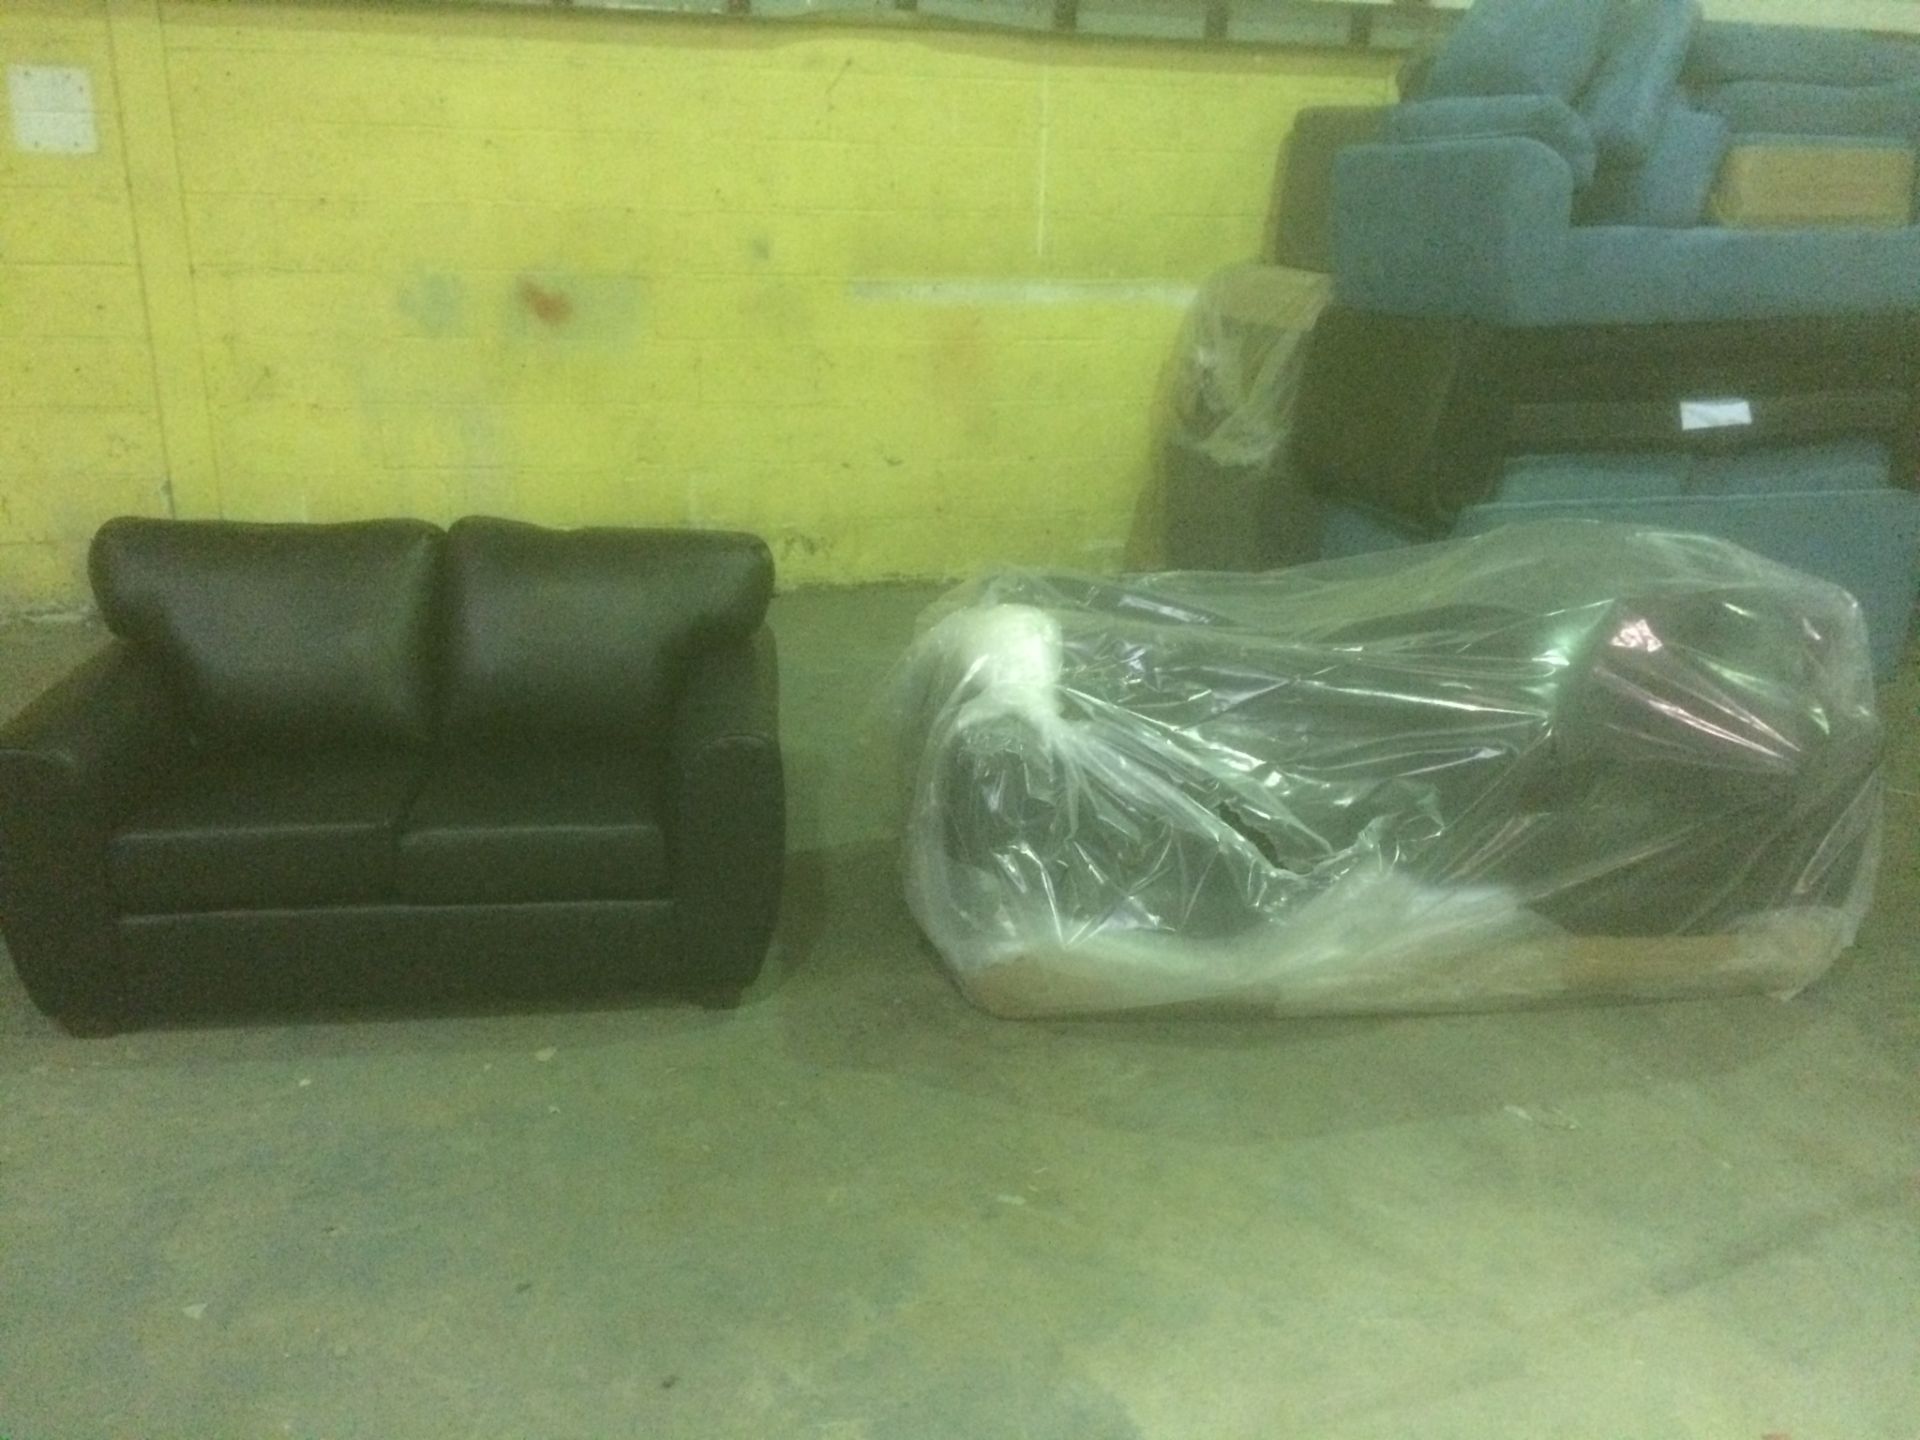 Parker 3 seater plus 2 seater black leather sofas with contrasting dark oak wooden feet - Image 2 of 2